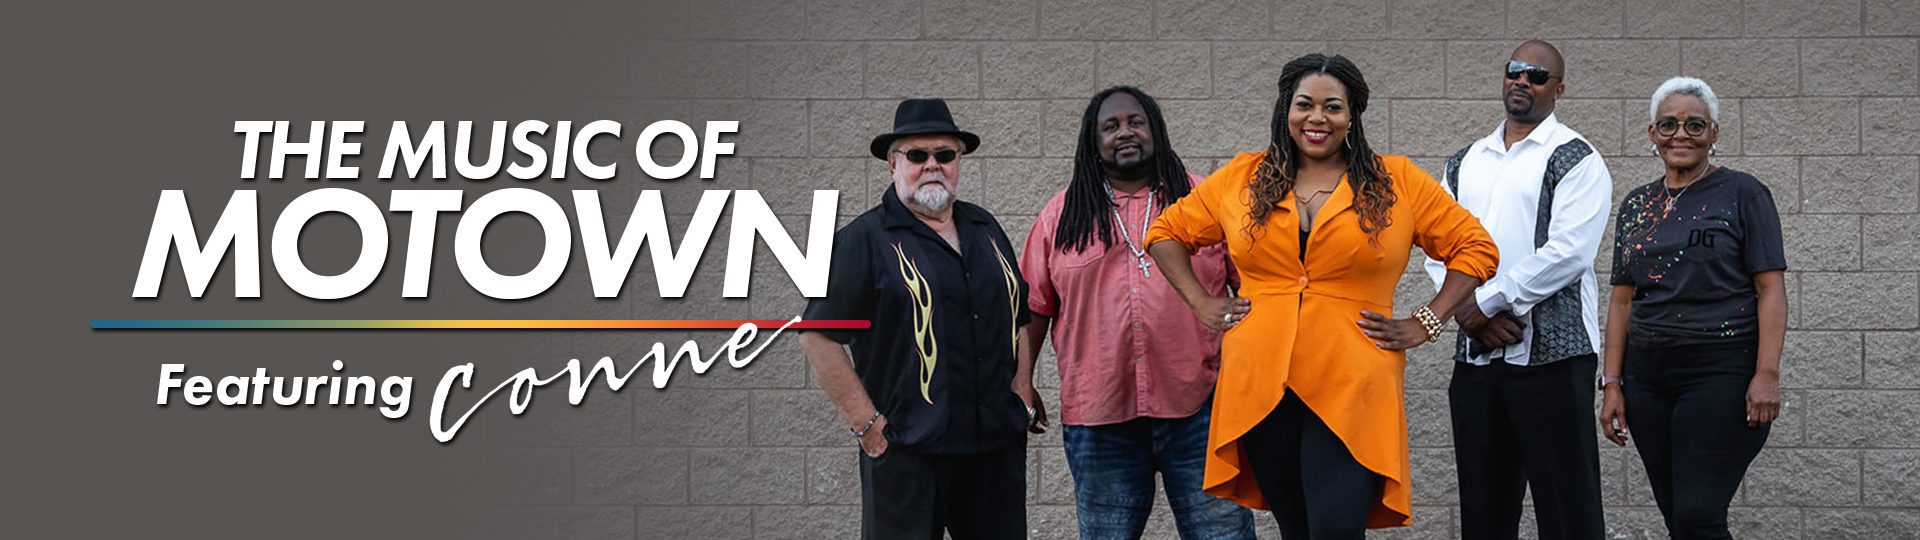 The Music of Motown, Featuring CONNE